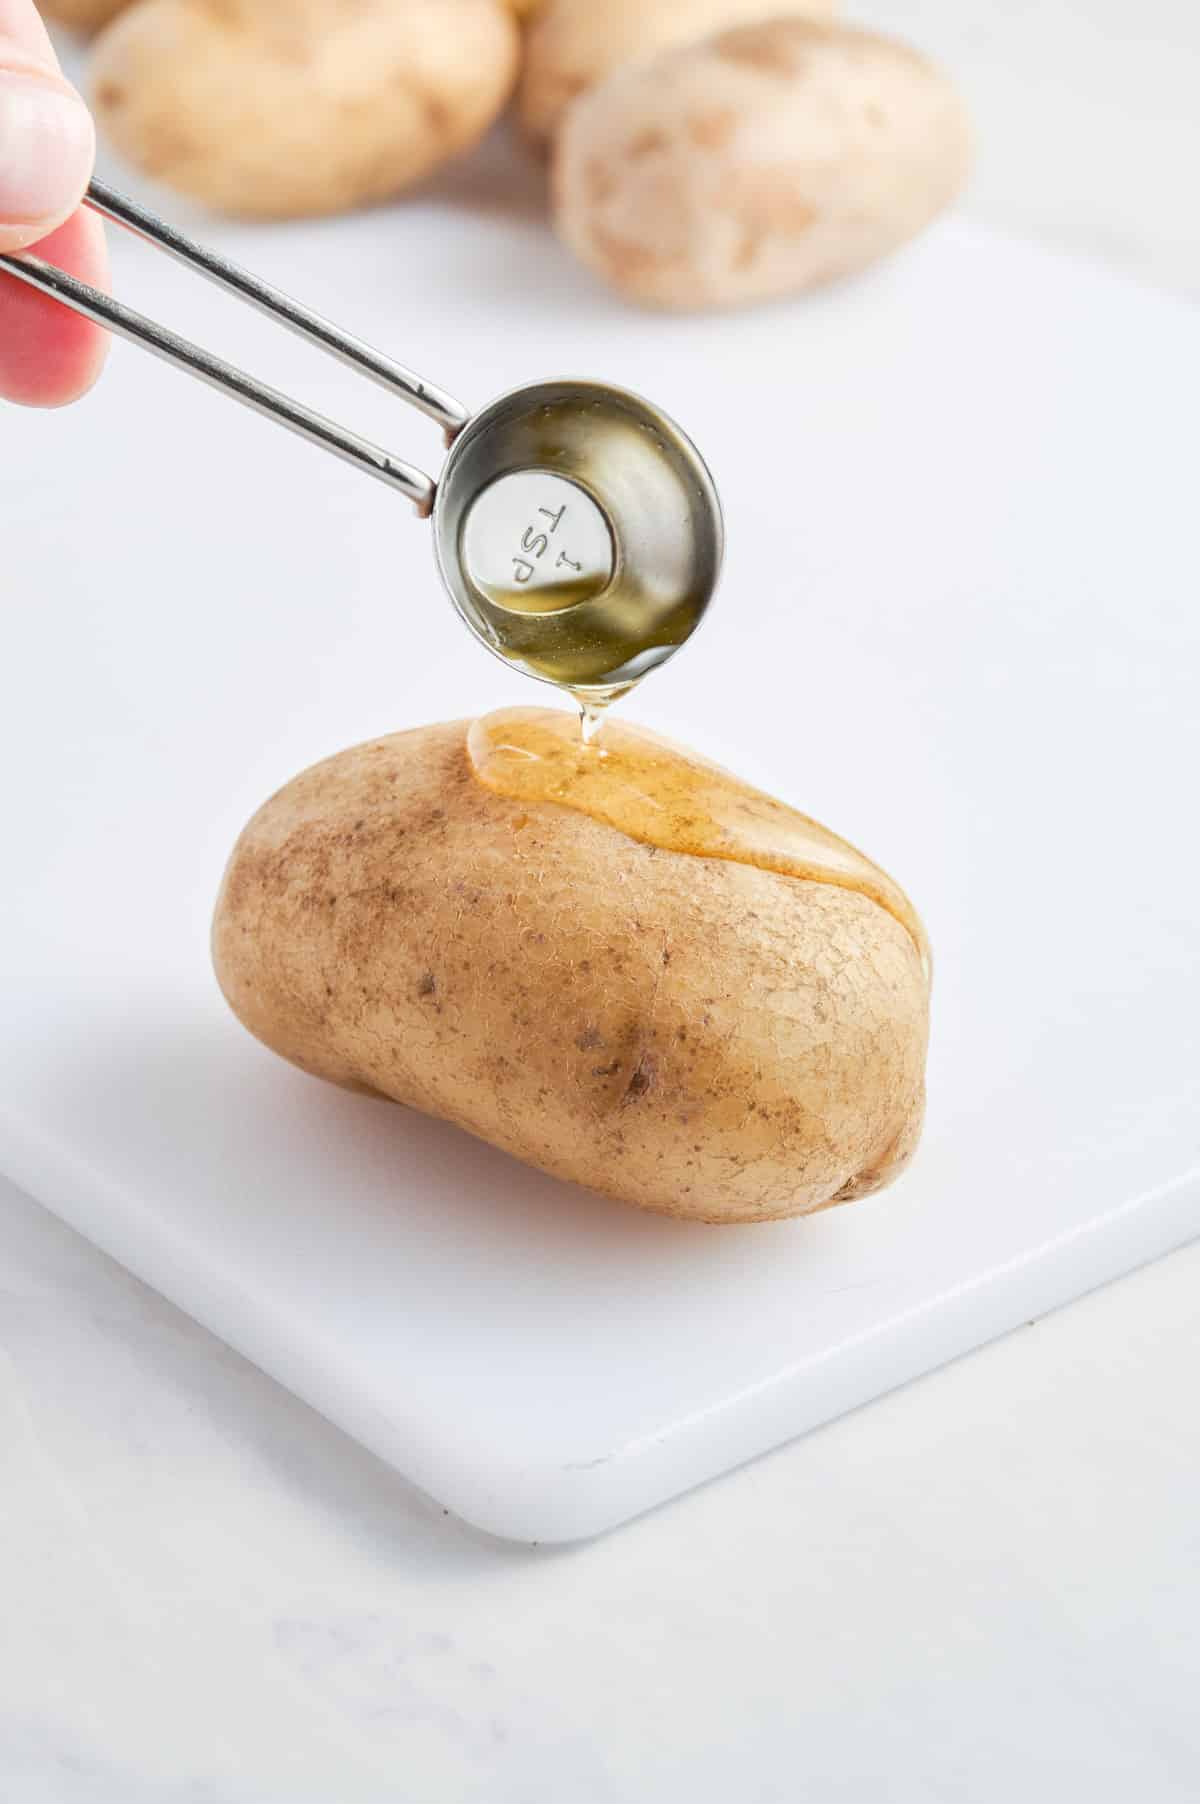 Oil is drizzled over a potato.